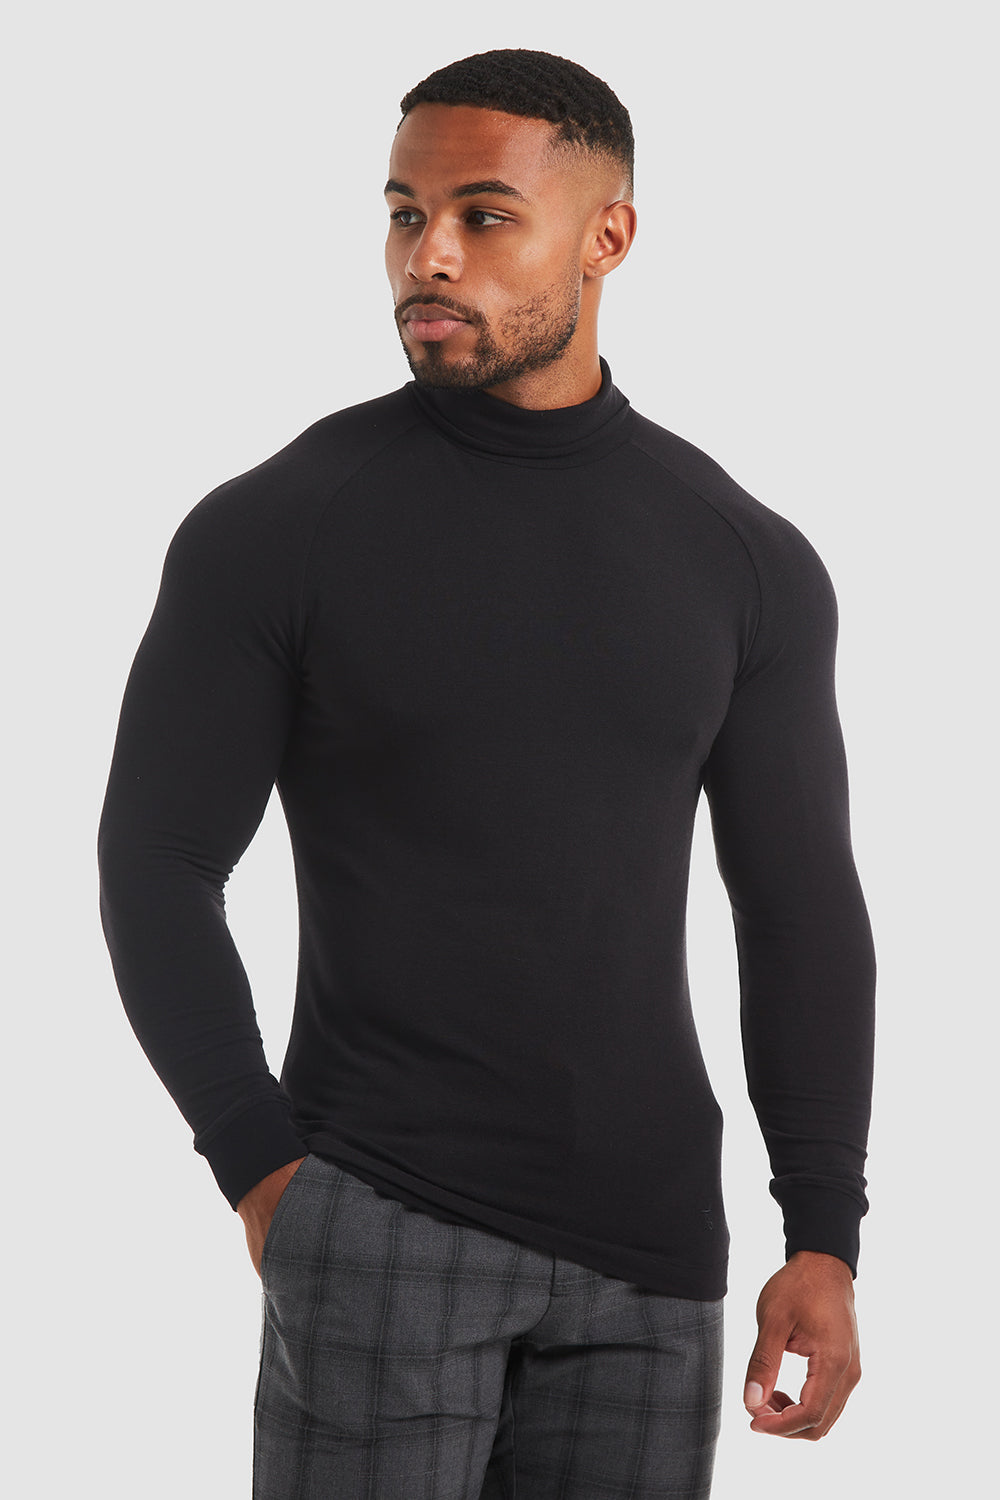 Knit Look Jersey Roll Neck (LS) in Black - TAILORED ATHLETE - ROW